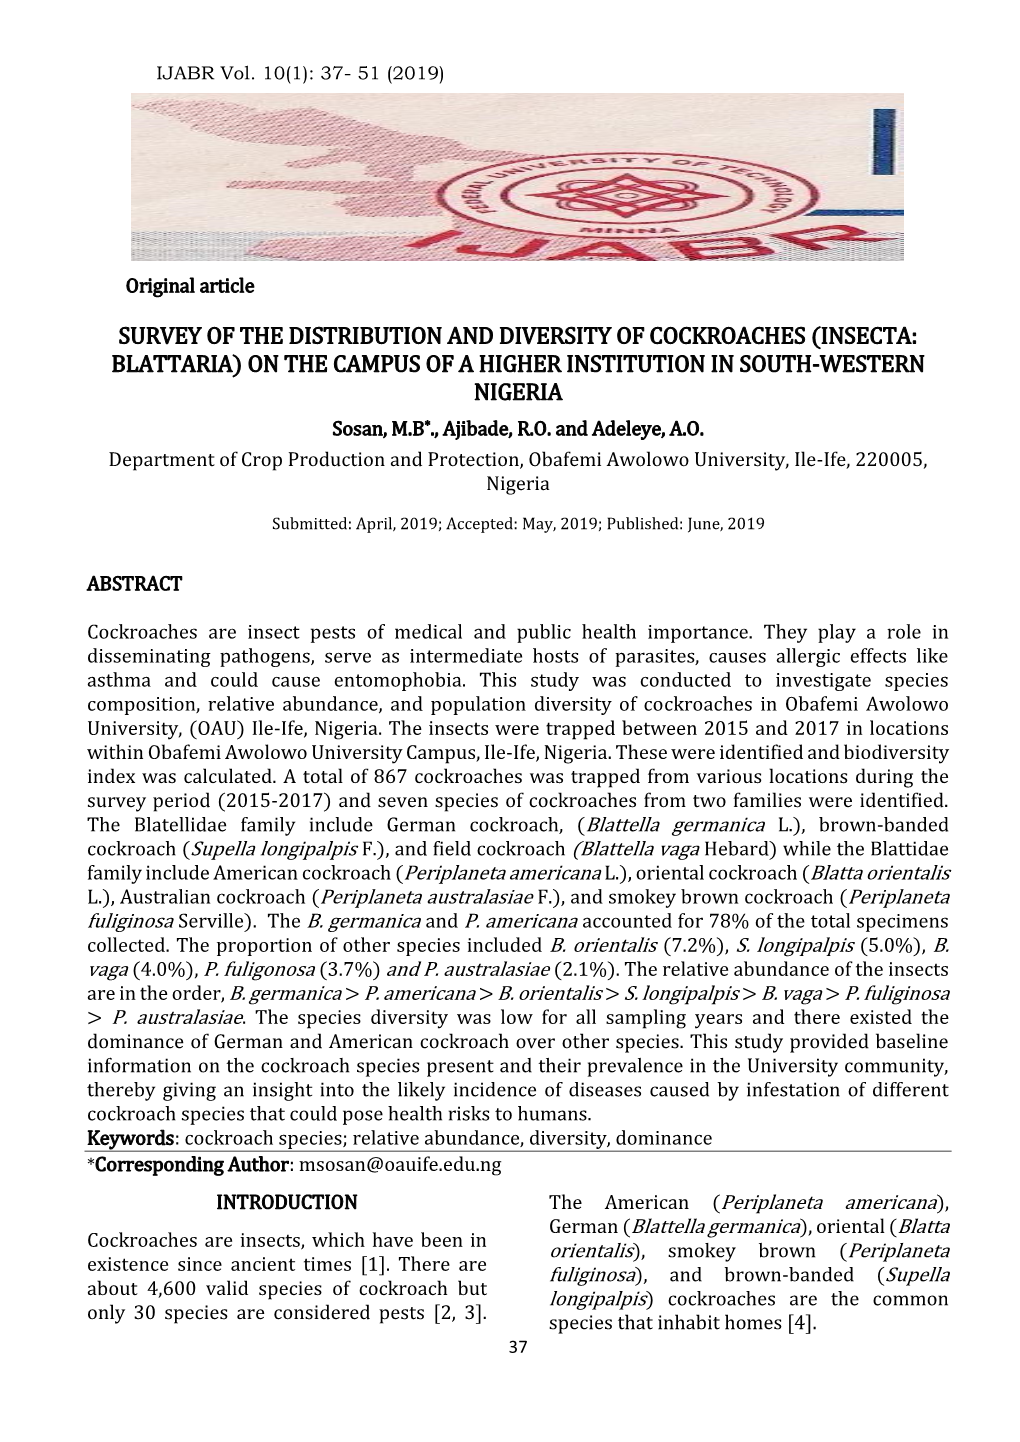 SURVEY of the DISTRIBUTION and DIVERSITY of COCKROACHES (INSECTA: BLATTARIA) on the CAMPUS of a HIGHER INSTITUTION in SOUTH-WESTERN NIGERIA Sosan, M.B*., Ajibade, R.O